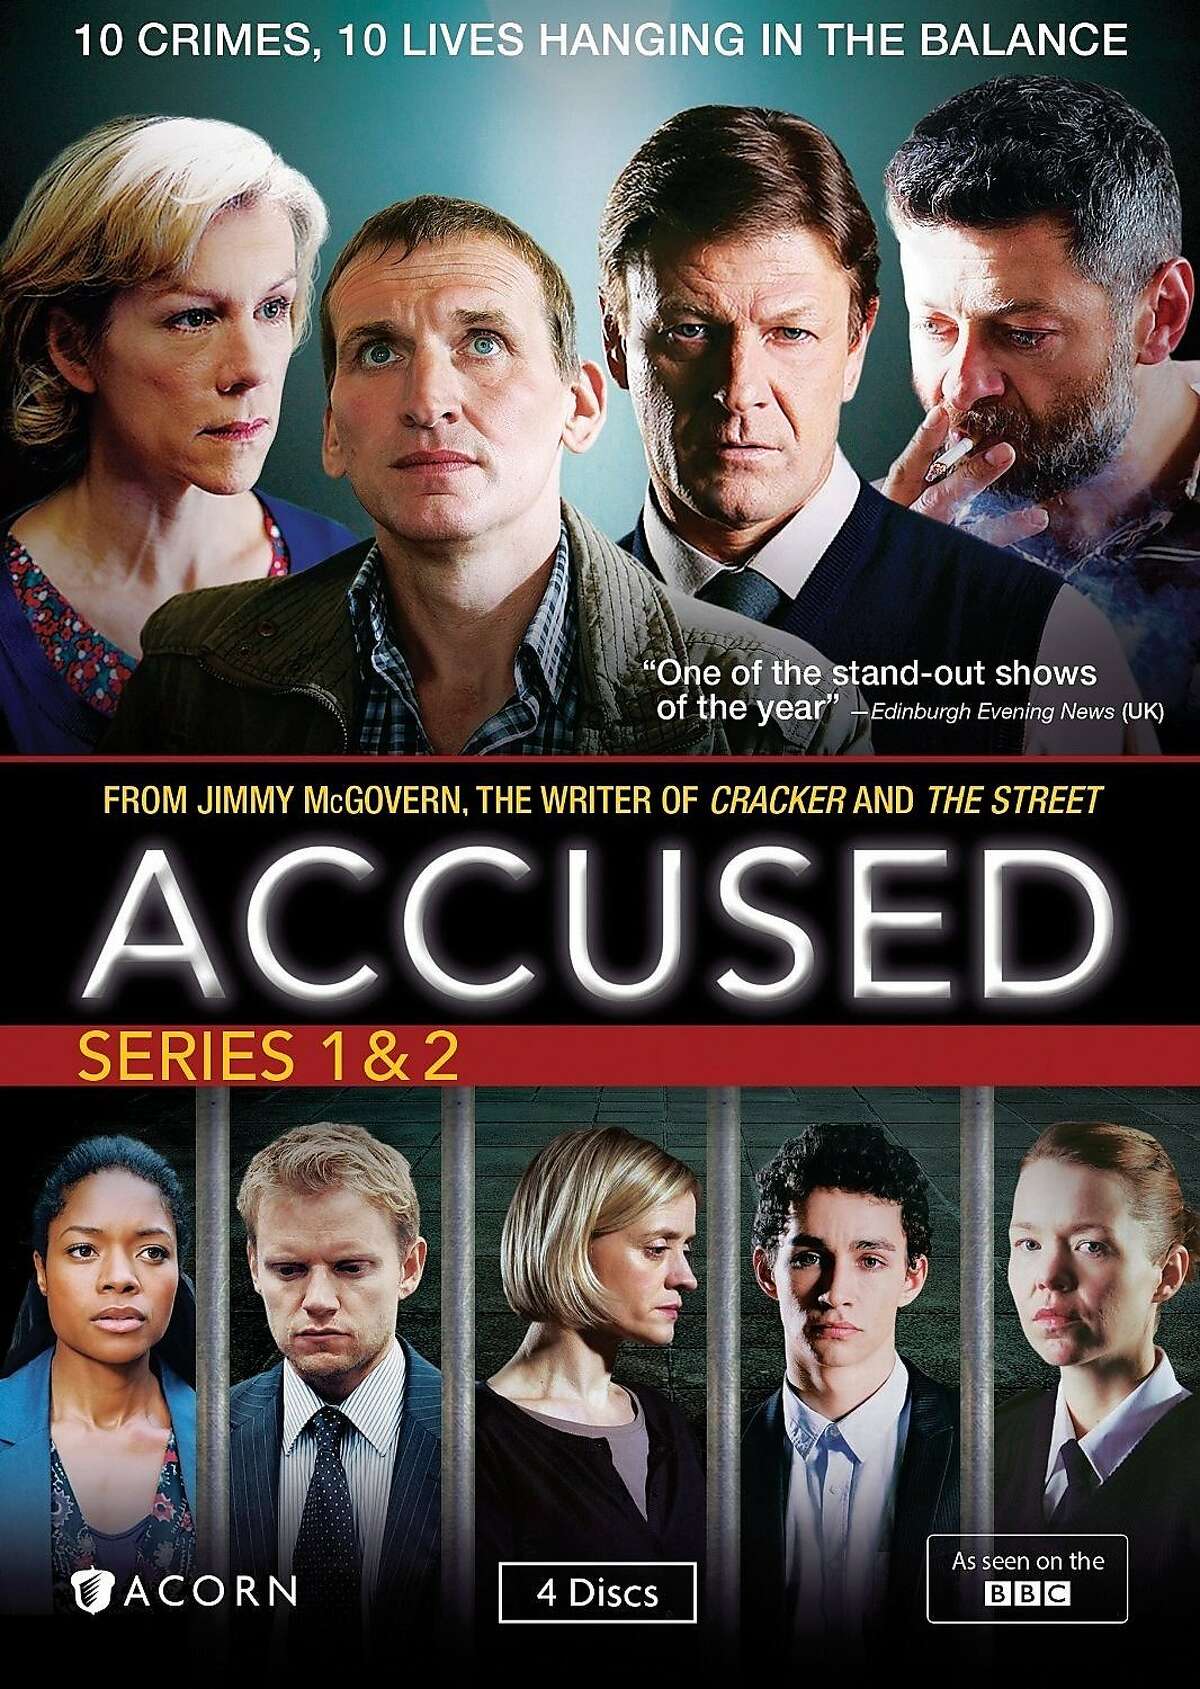 DVD review 'Accused Series 1 & 2’